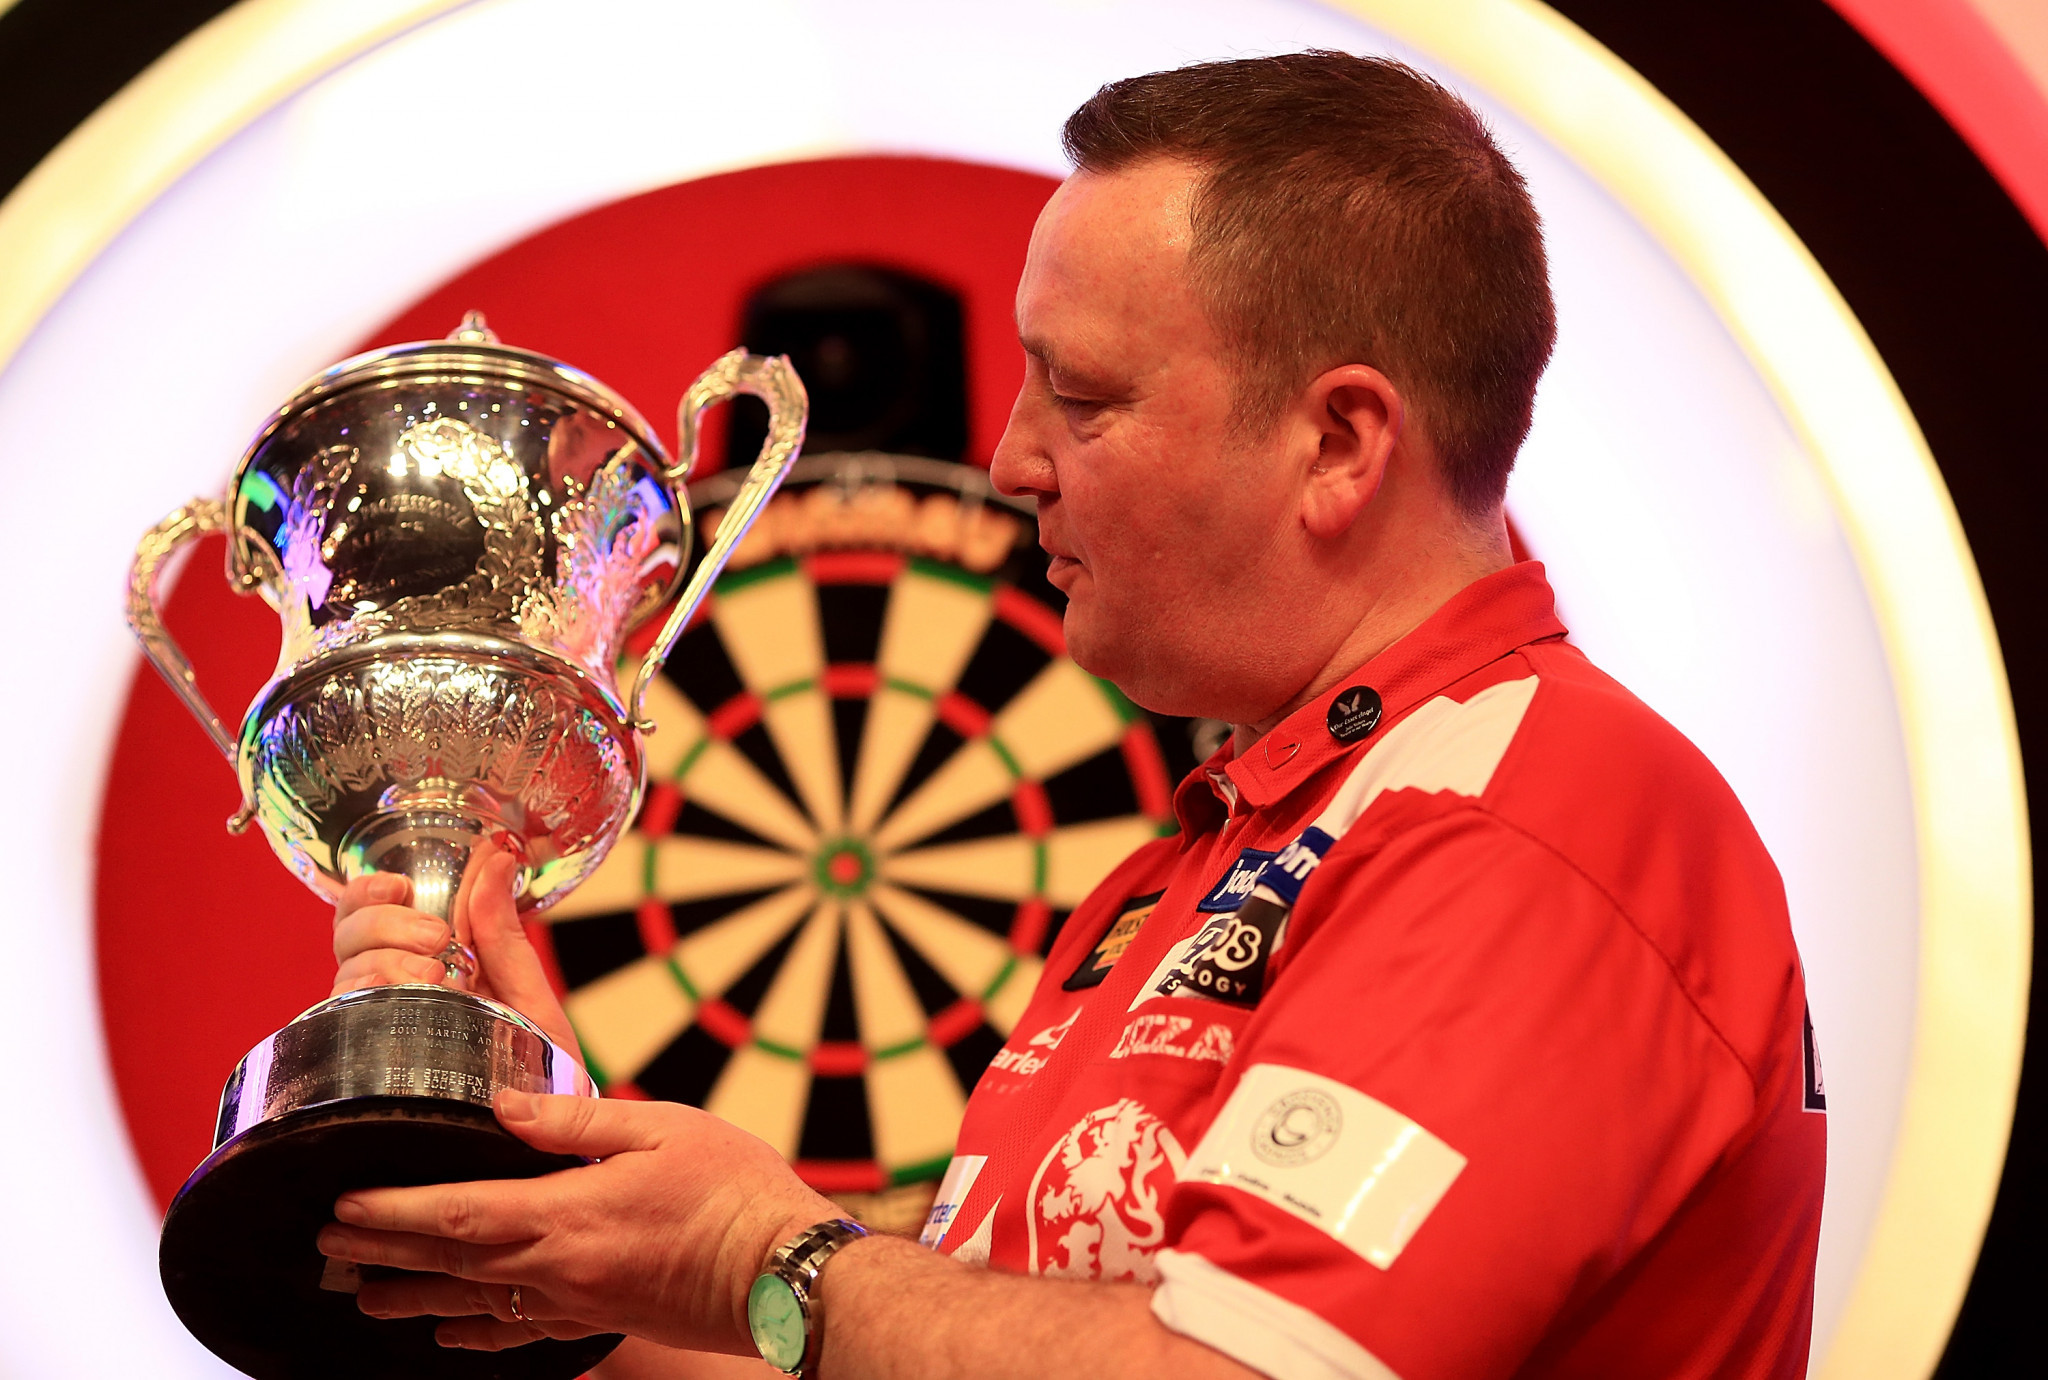 England's Glen Durrant will not have the chance to defend the team title won at the last WDF World Cup as plans to compete in Kobe have been cancelled ©Getty Images